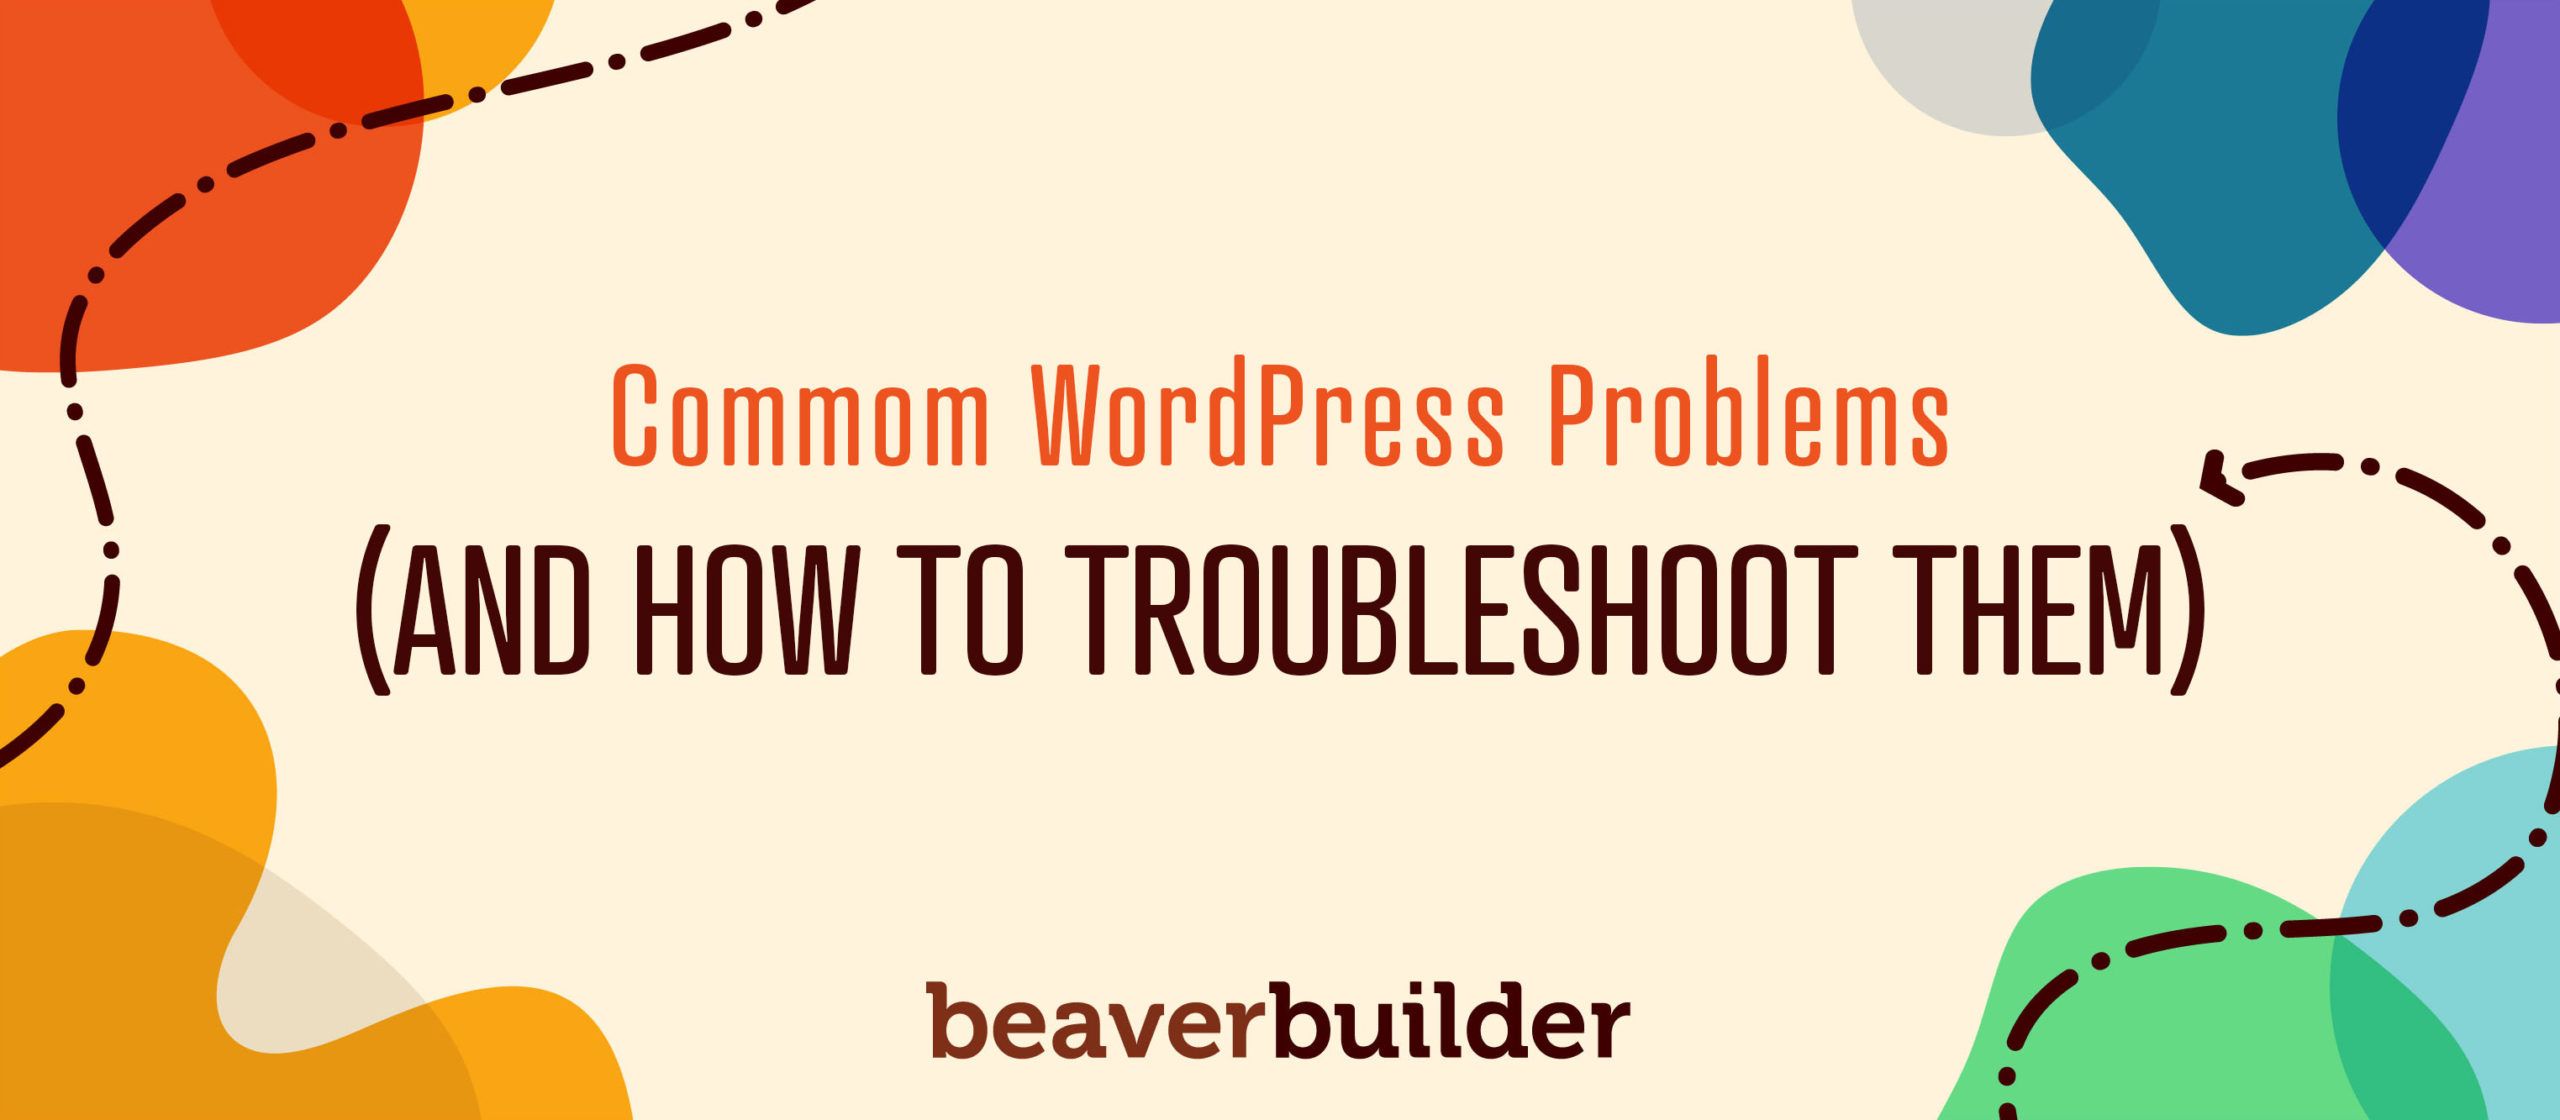 5 Common Wordpress Problems And How To Troubleshoot Them Beaver Builder